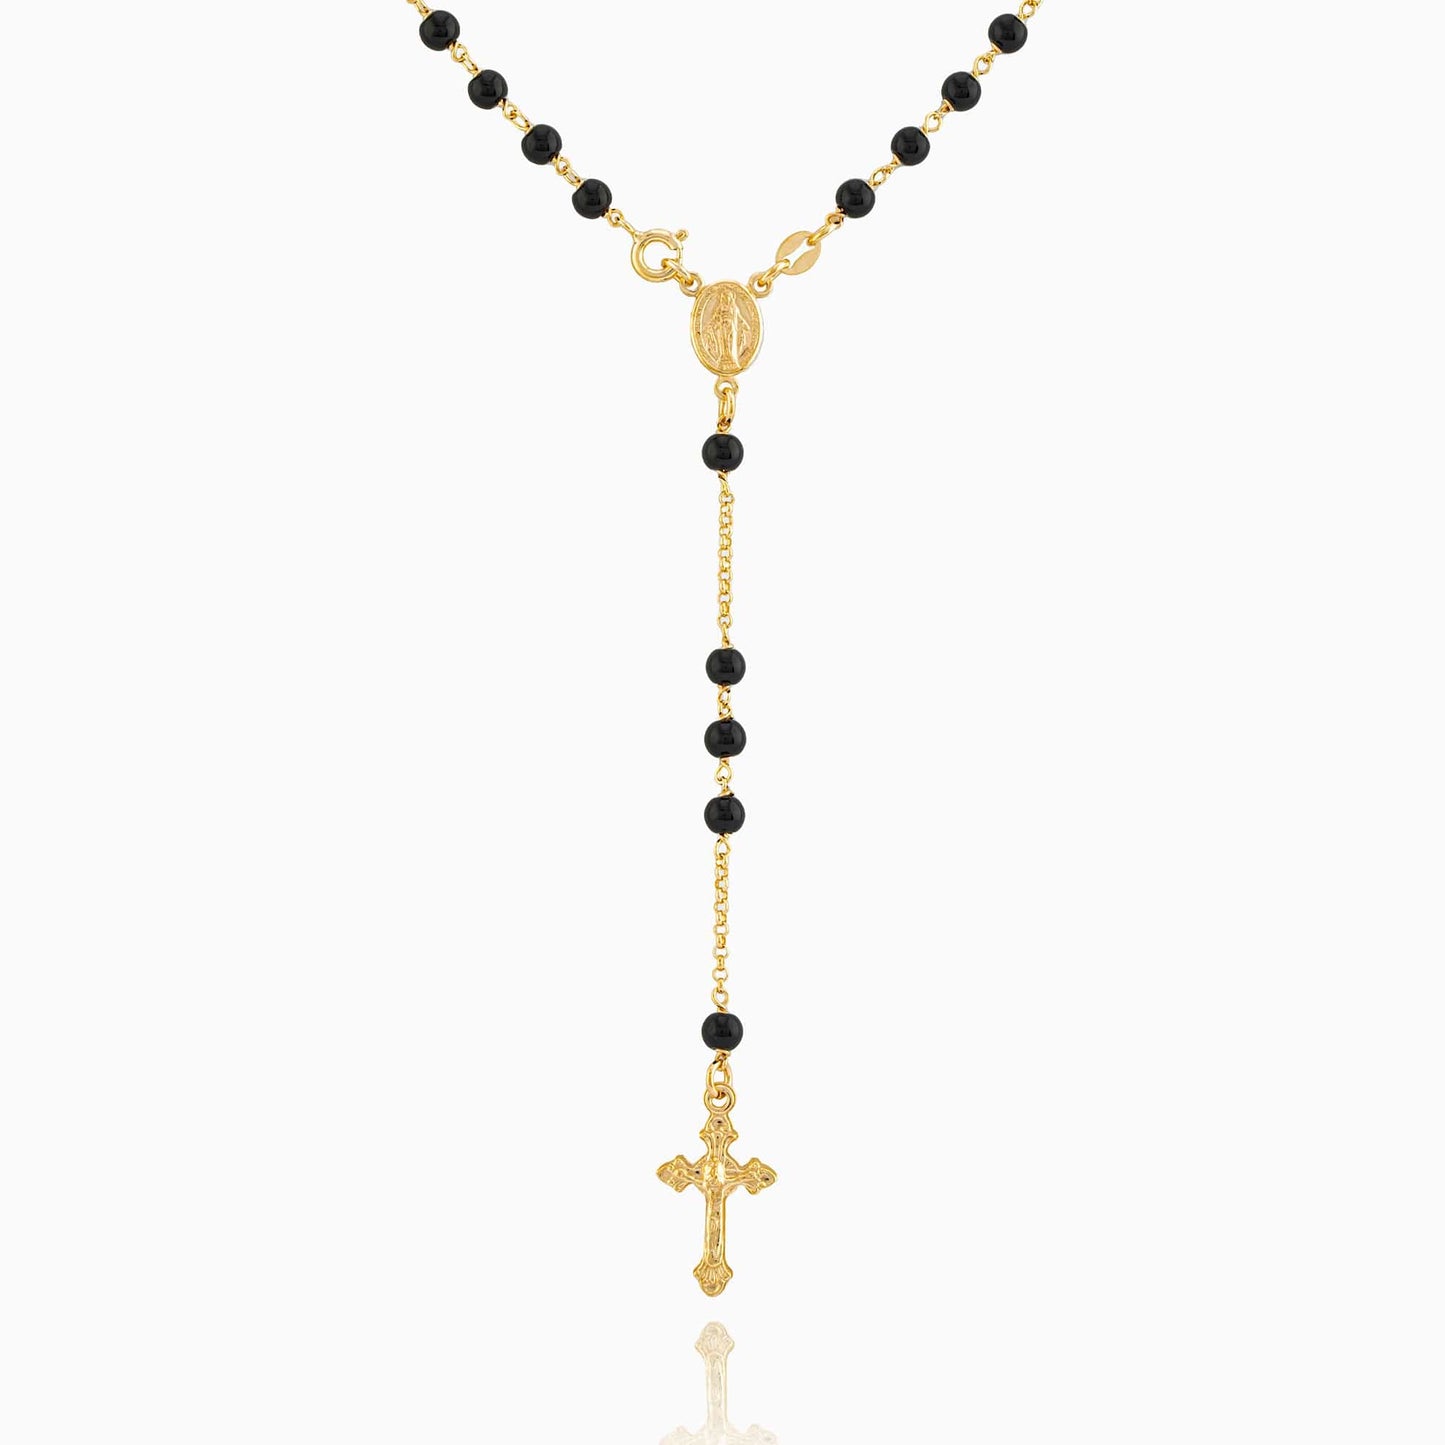 MONDO CATTOLICO Prayer Beads Gold / Cm 50 (19.7 in) MIRACULOUS MARY ROSARY 5 MM BLACK BEADS